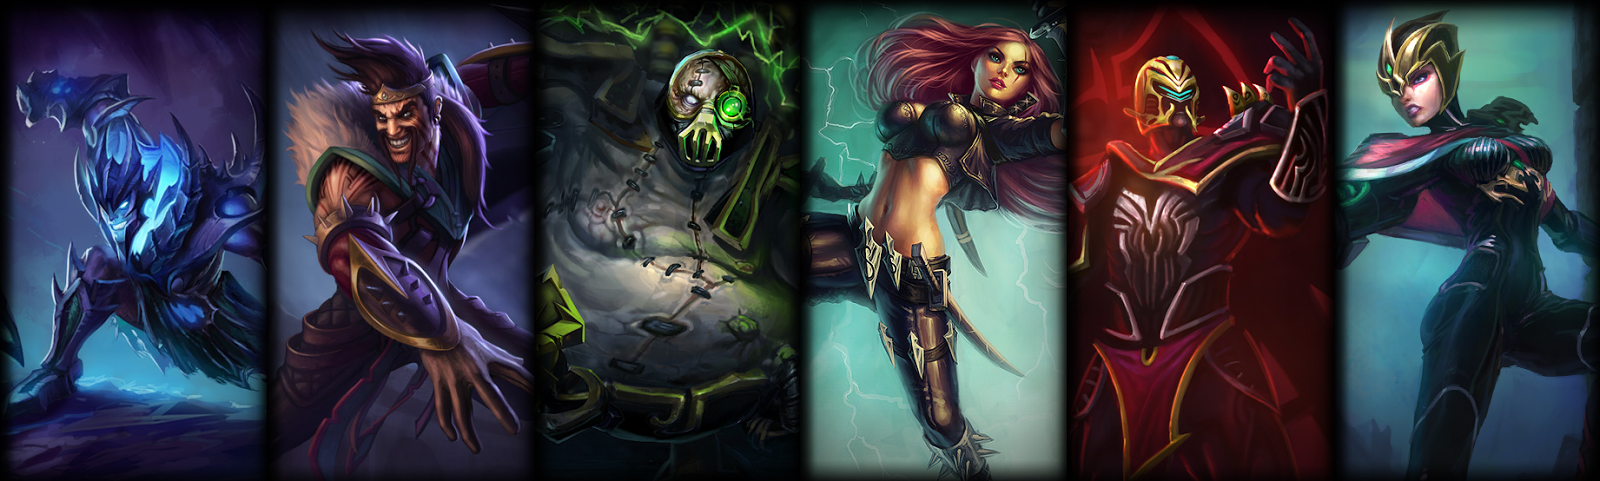 Surrender at 20: New Champion and Skin Sale 1/22 - 1/25